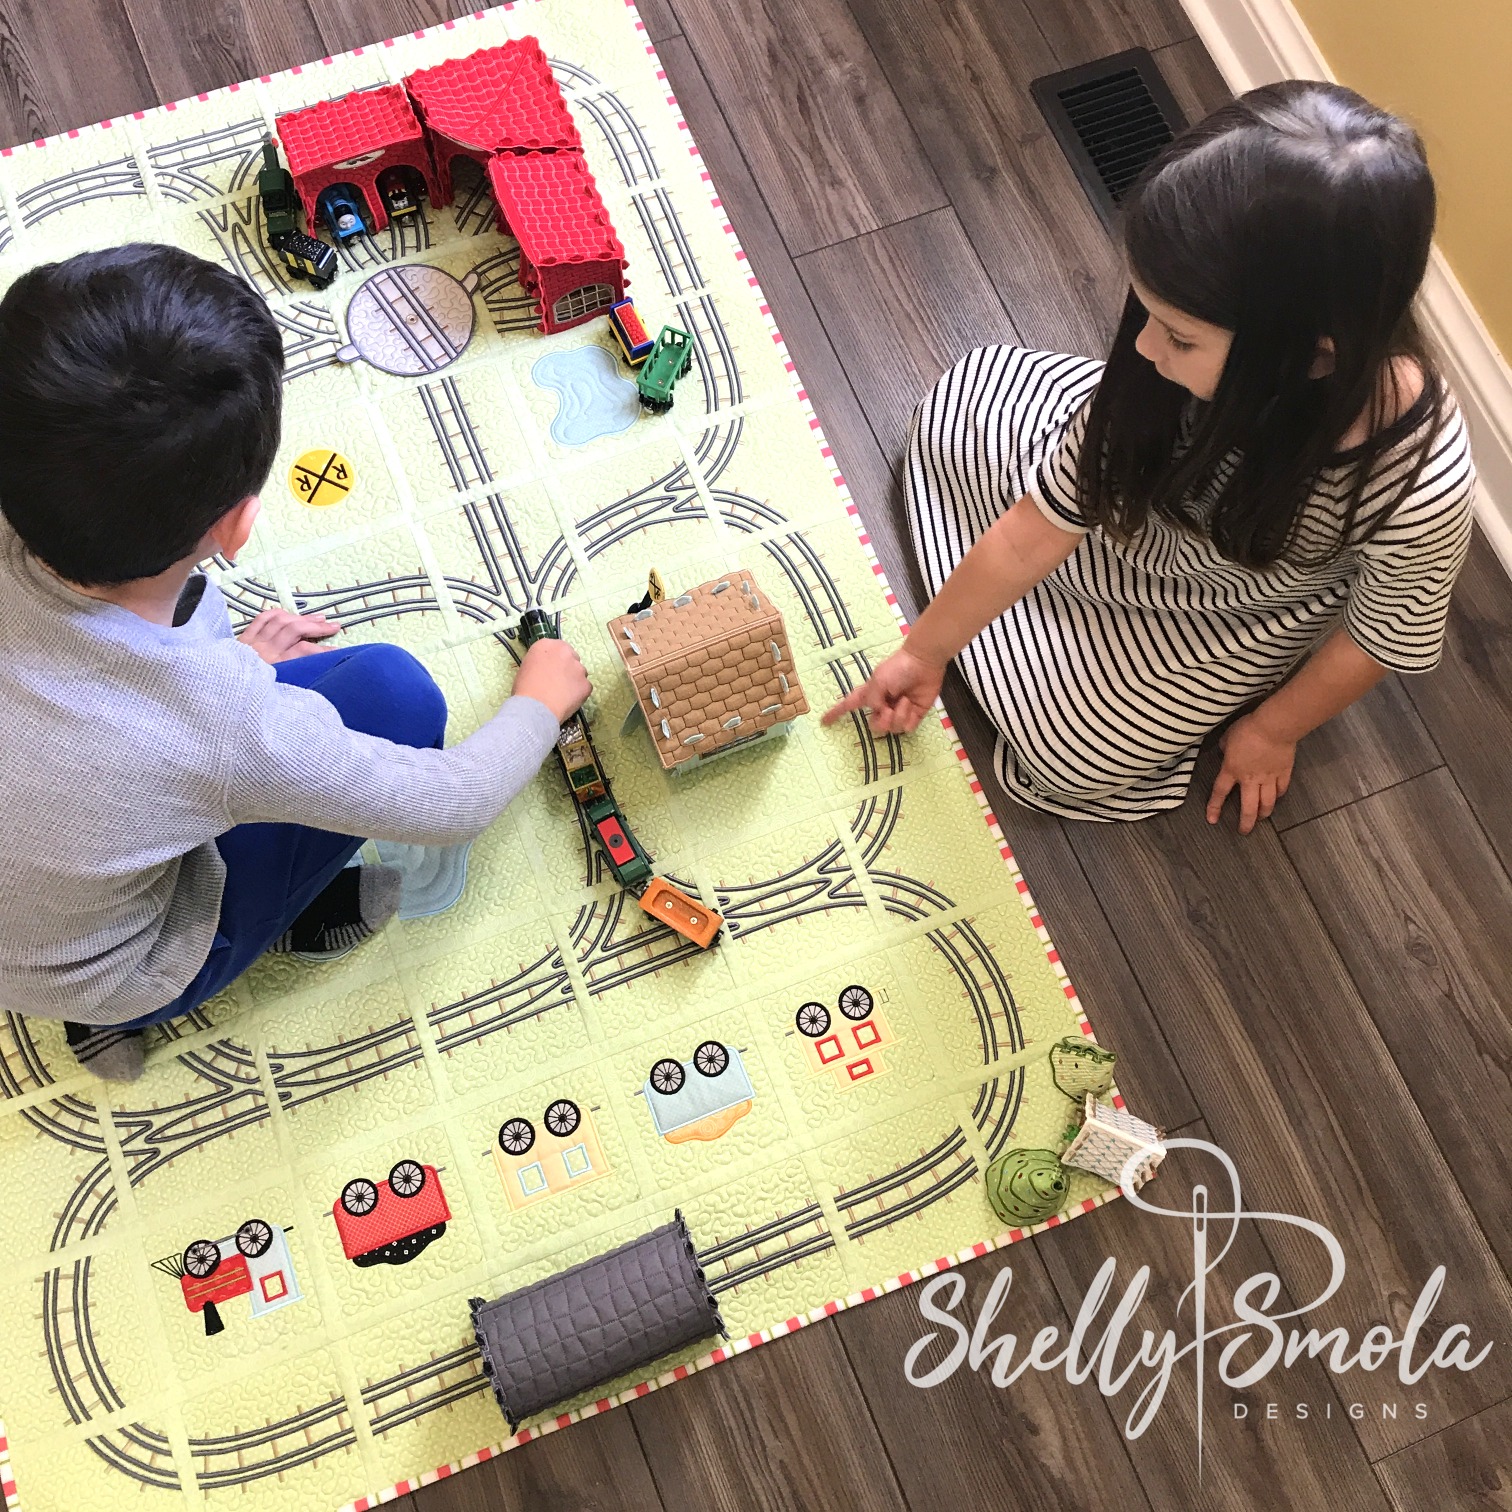 Bedtime Rail Line with Kate and Des by Shelly Smola